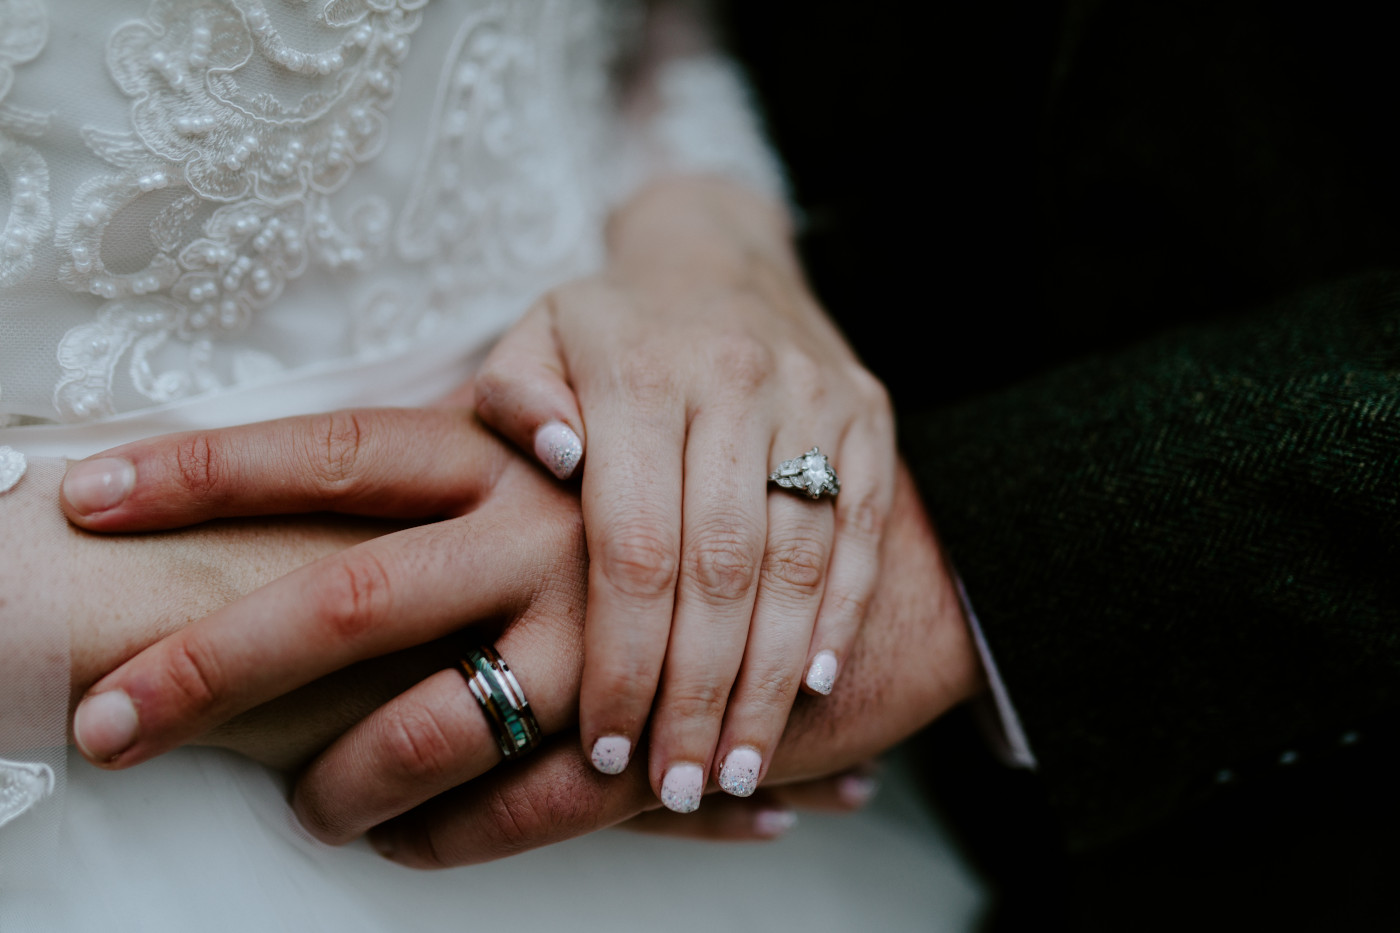 Alex and Elizabeth's rings'. Elopement photography at North Cascades National Park by Sienna Plus Josh.